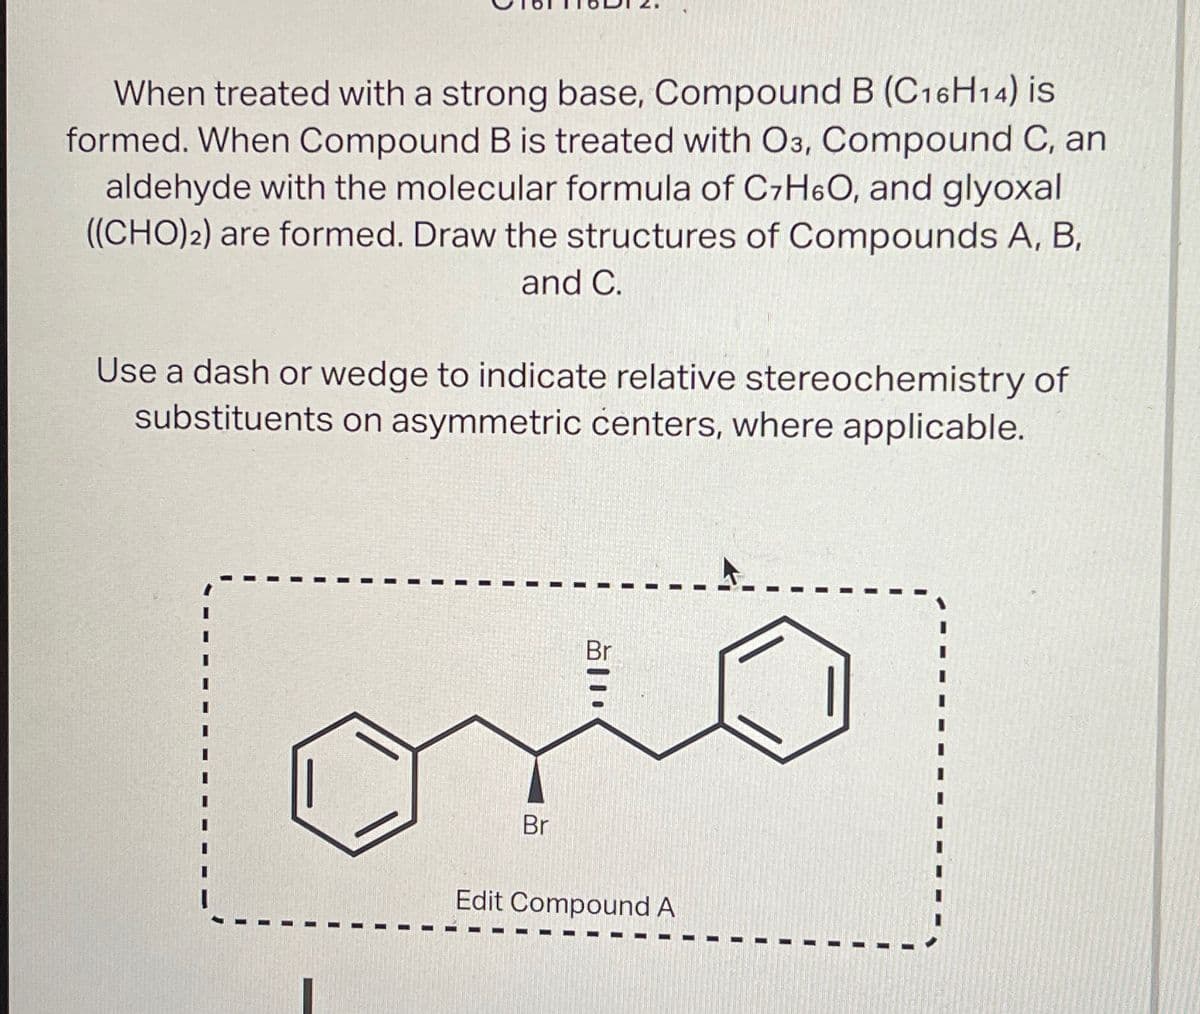 When treated with a strong base, Compound B (C16H14) is
formed. When Compound B is treated with O3, Compound C, an
aldehyde with the molecular formula of C7H6O, and glyoxal
((CHO)2) are formed. Draw the structures of Compounds A, B,
and C.
Use a dash or wedge to indicate relative stereochemistry of
substituents on asymmetric centers, where applicable.
Br
Br
Edit Compound A